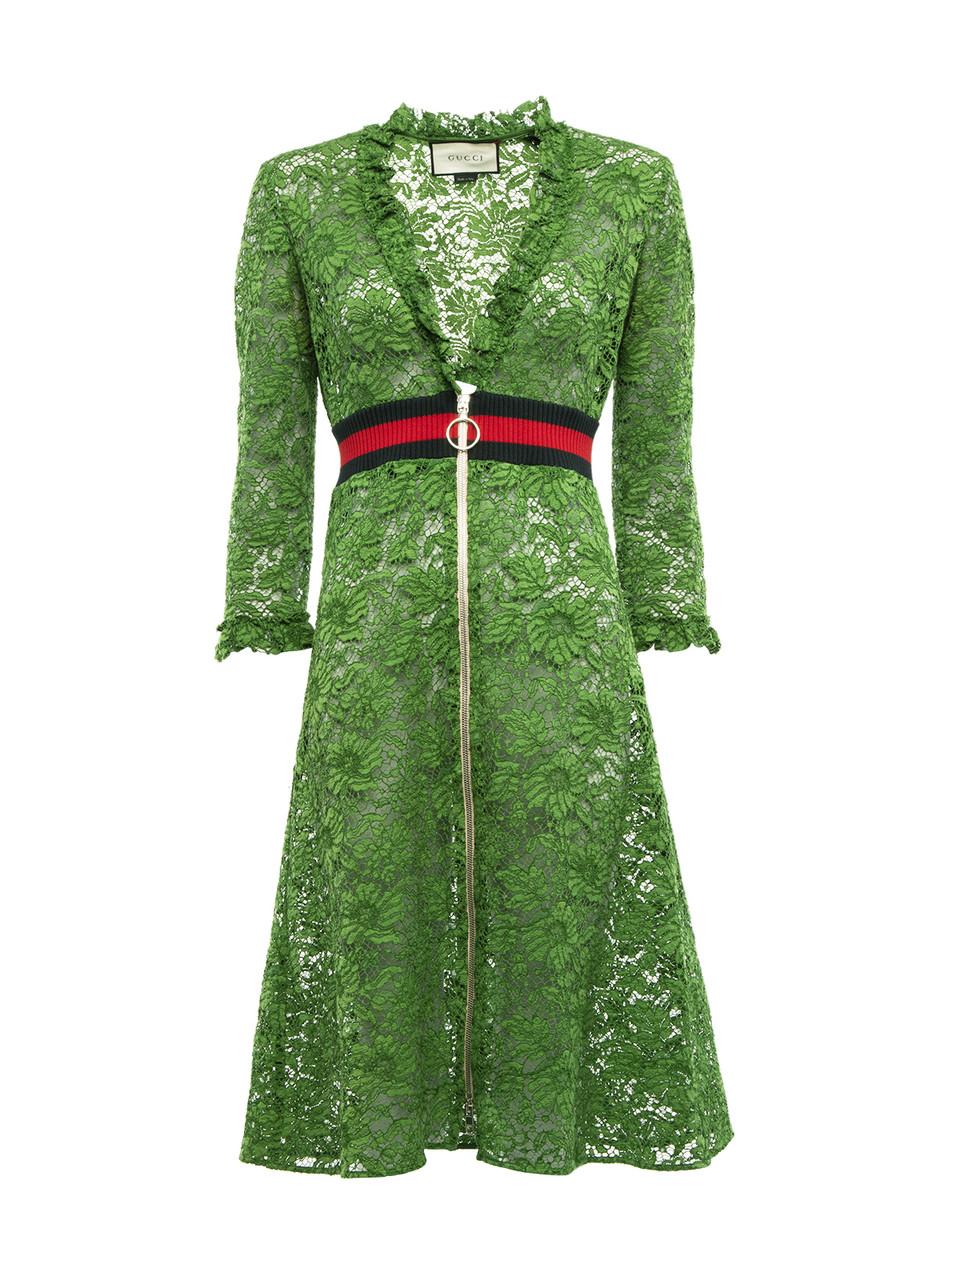 Gucci Lace Cocktail Dress Green